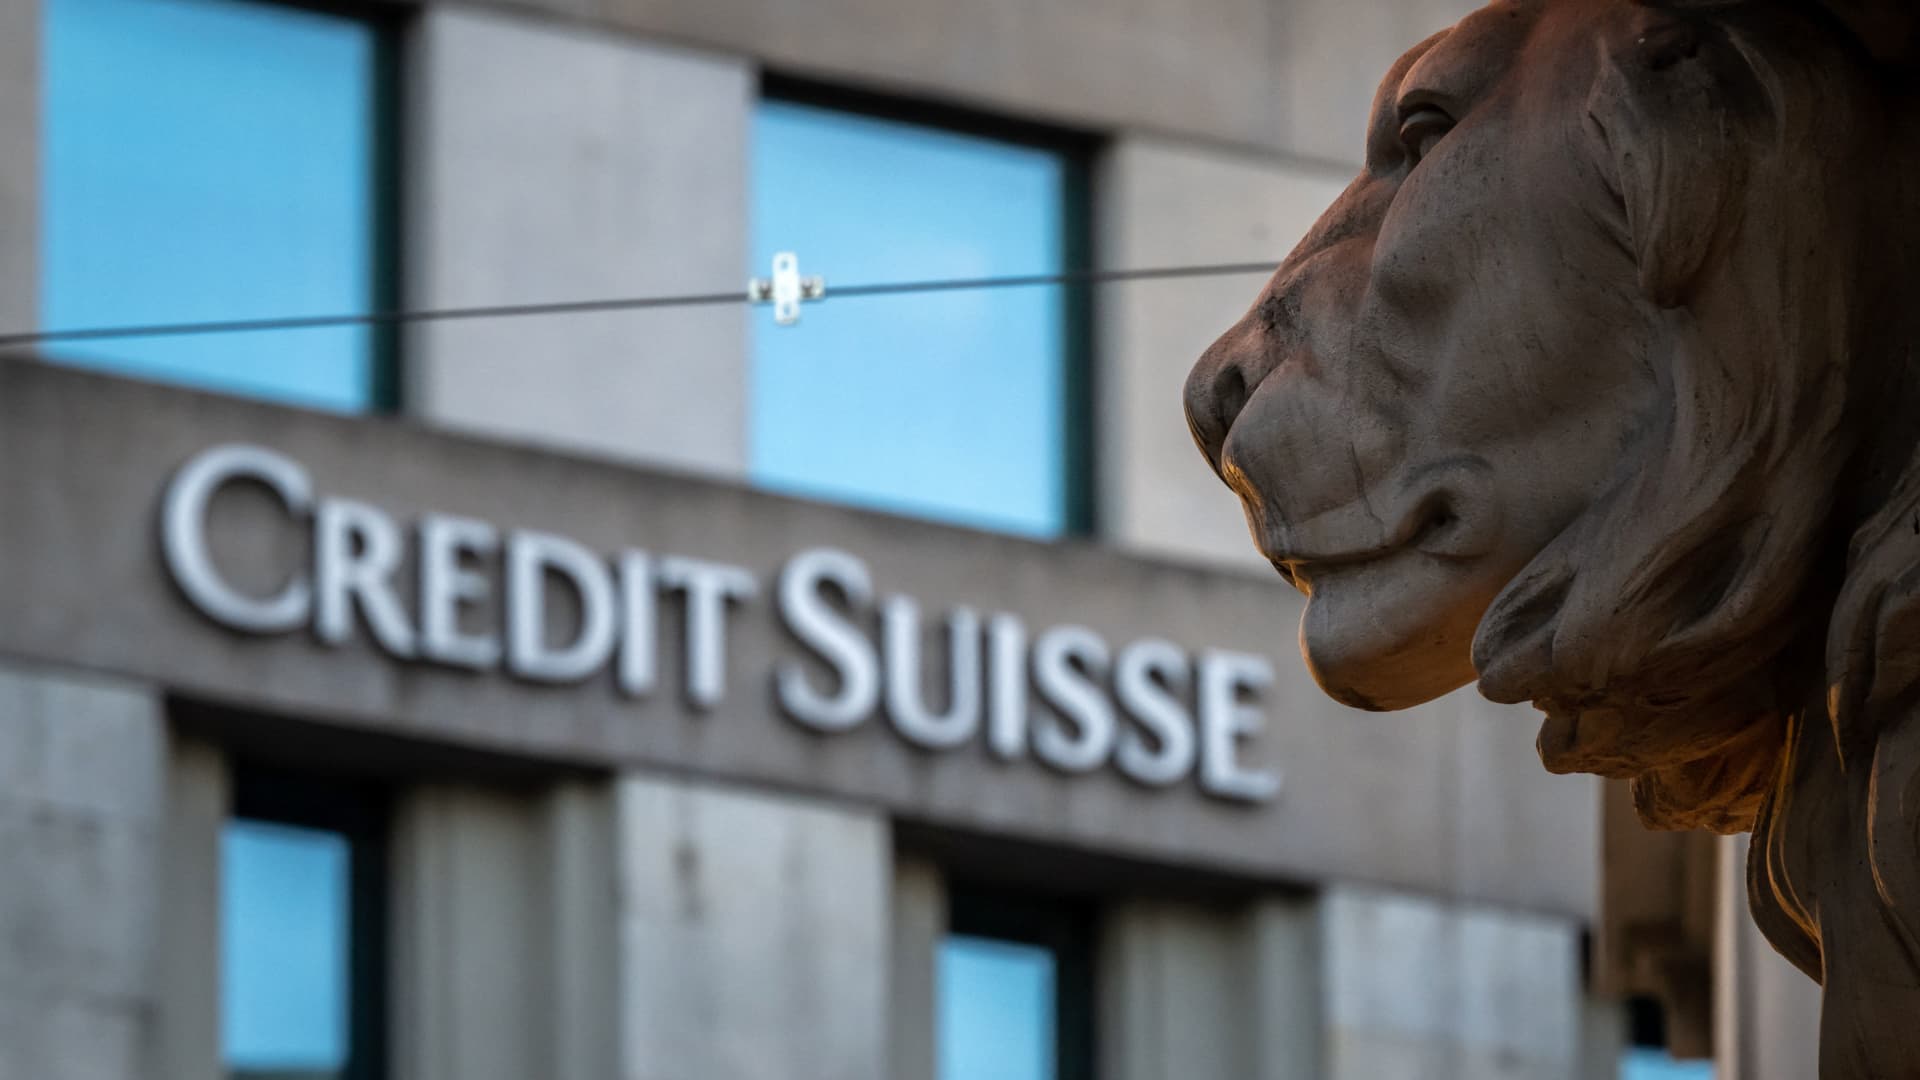 Each person’s talking about Credit score Suisse’s unhealthy bonds. Right here is what they’re and why they topic